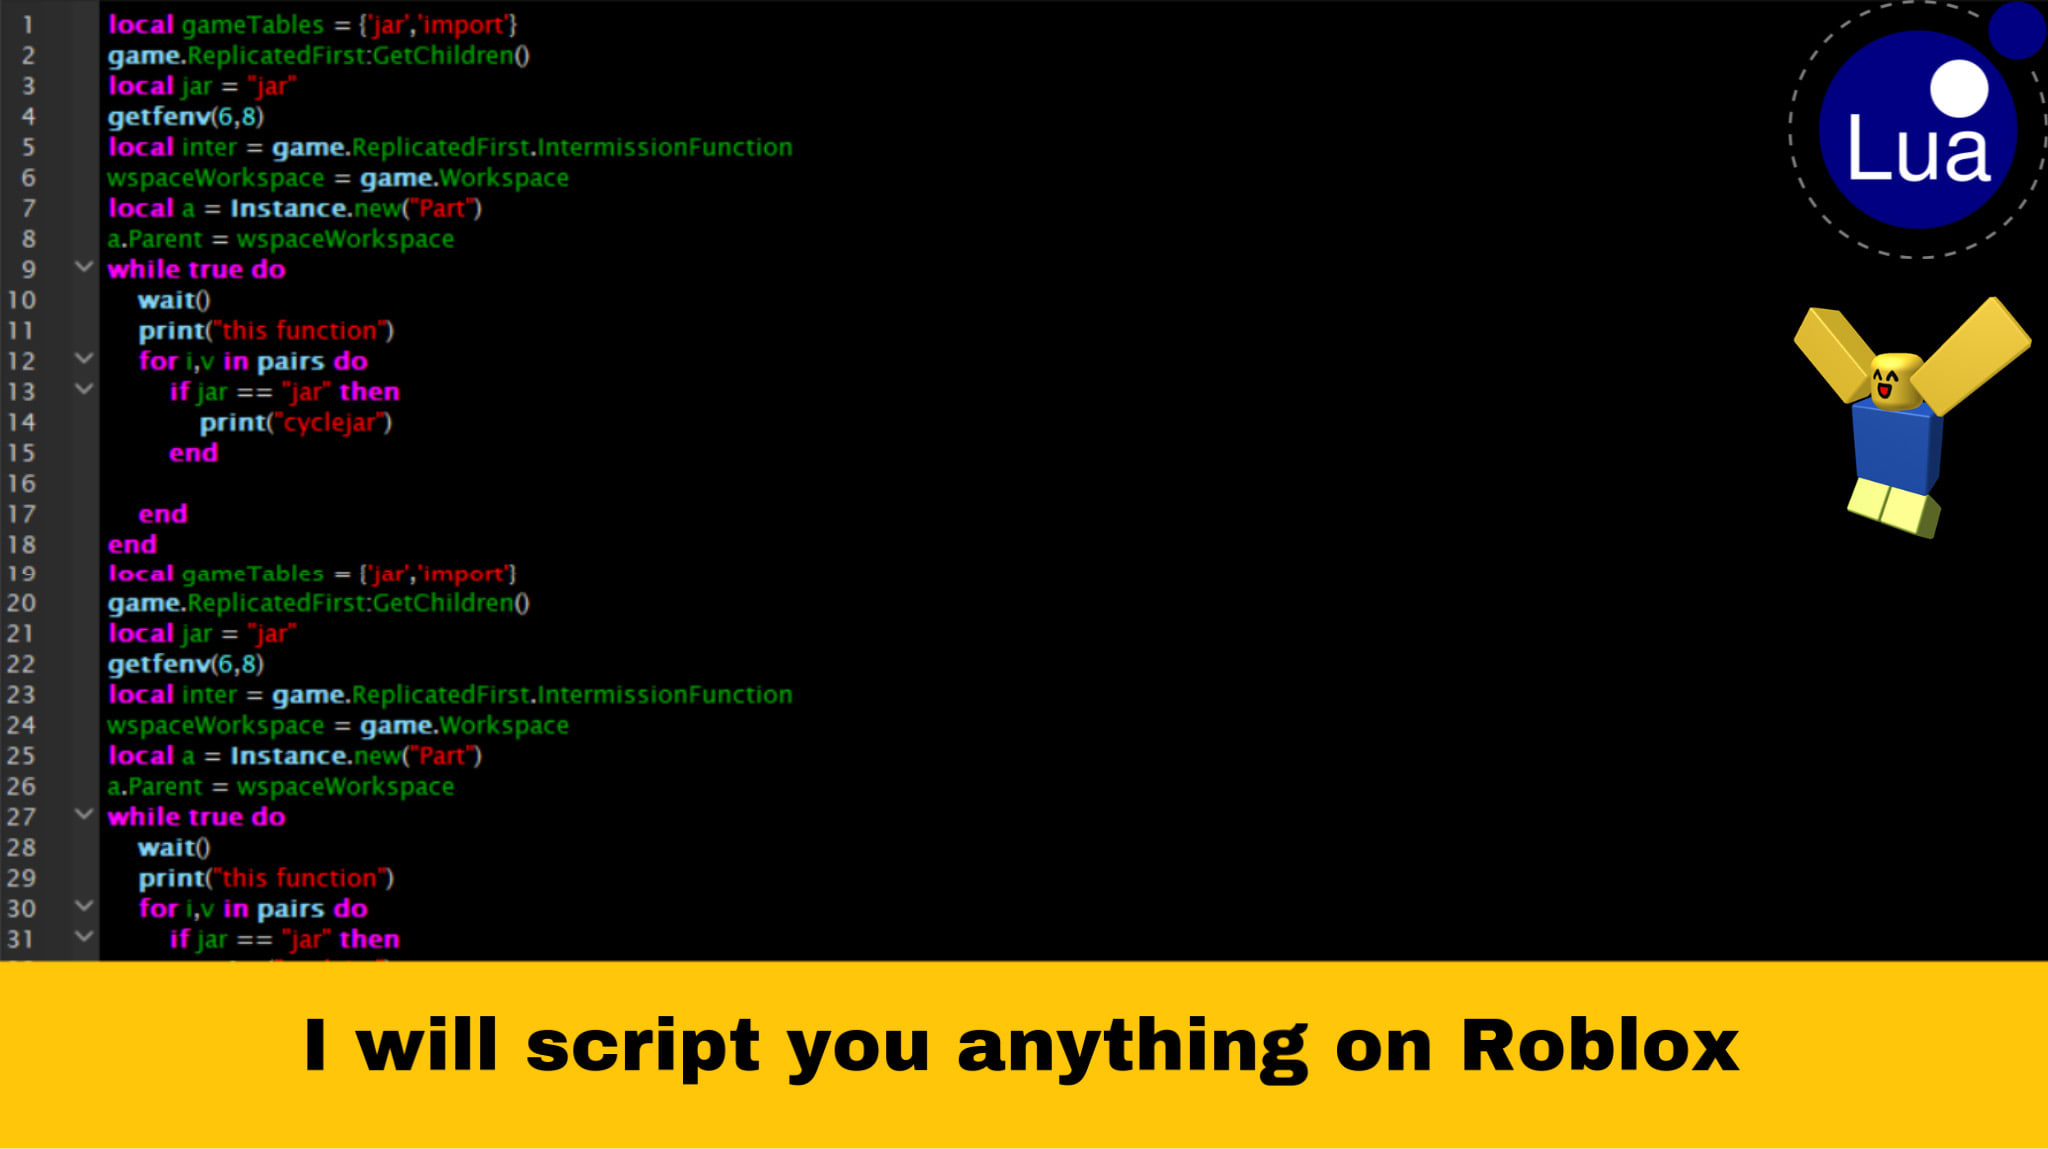 Make A Script Or A System For You On Roblox By Frepzter - getchildren roblox